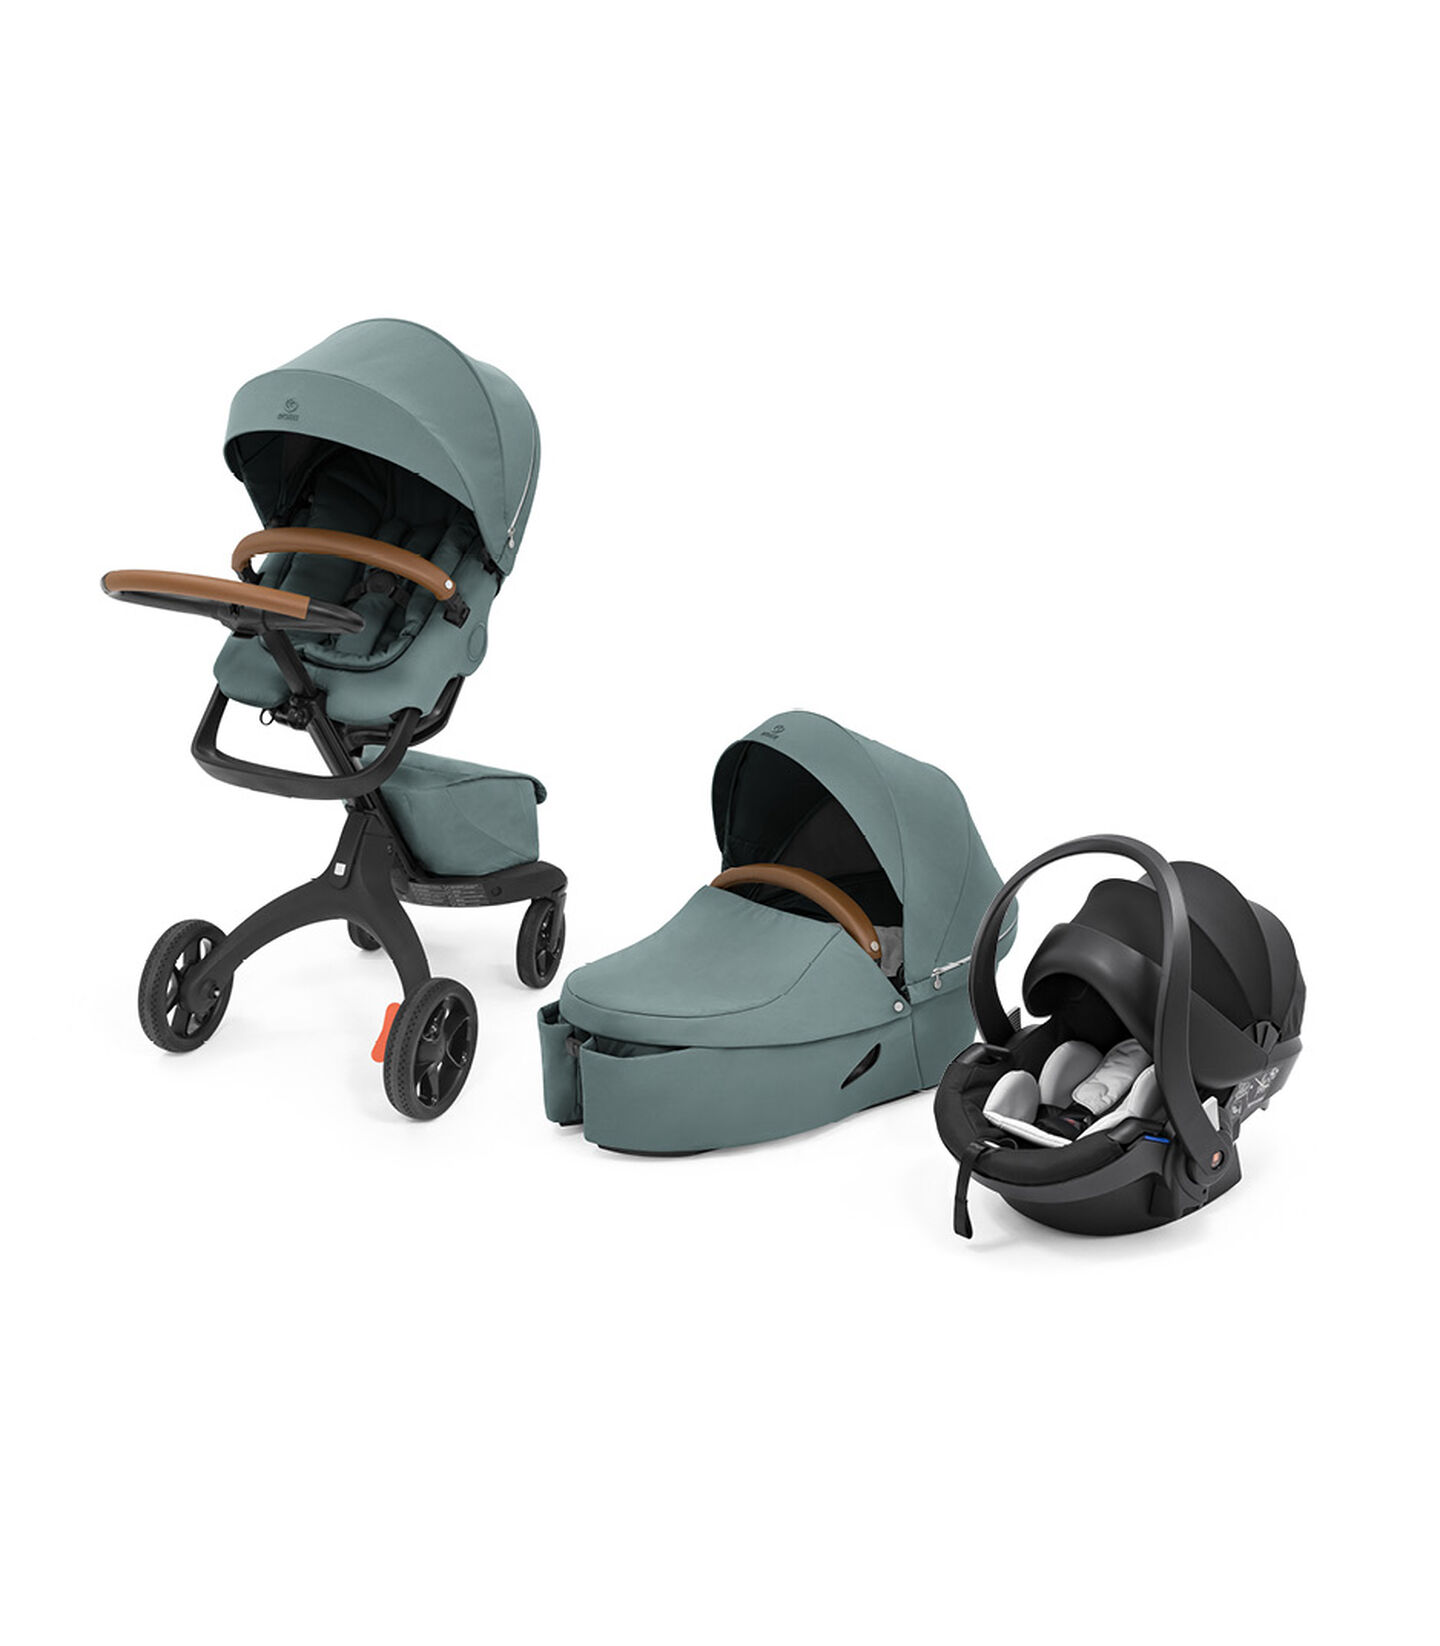 Stokke® Xplory® X Cool Teal, Cool Teal, mainview view 8